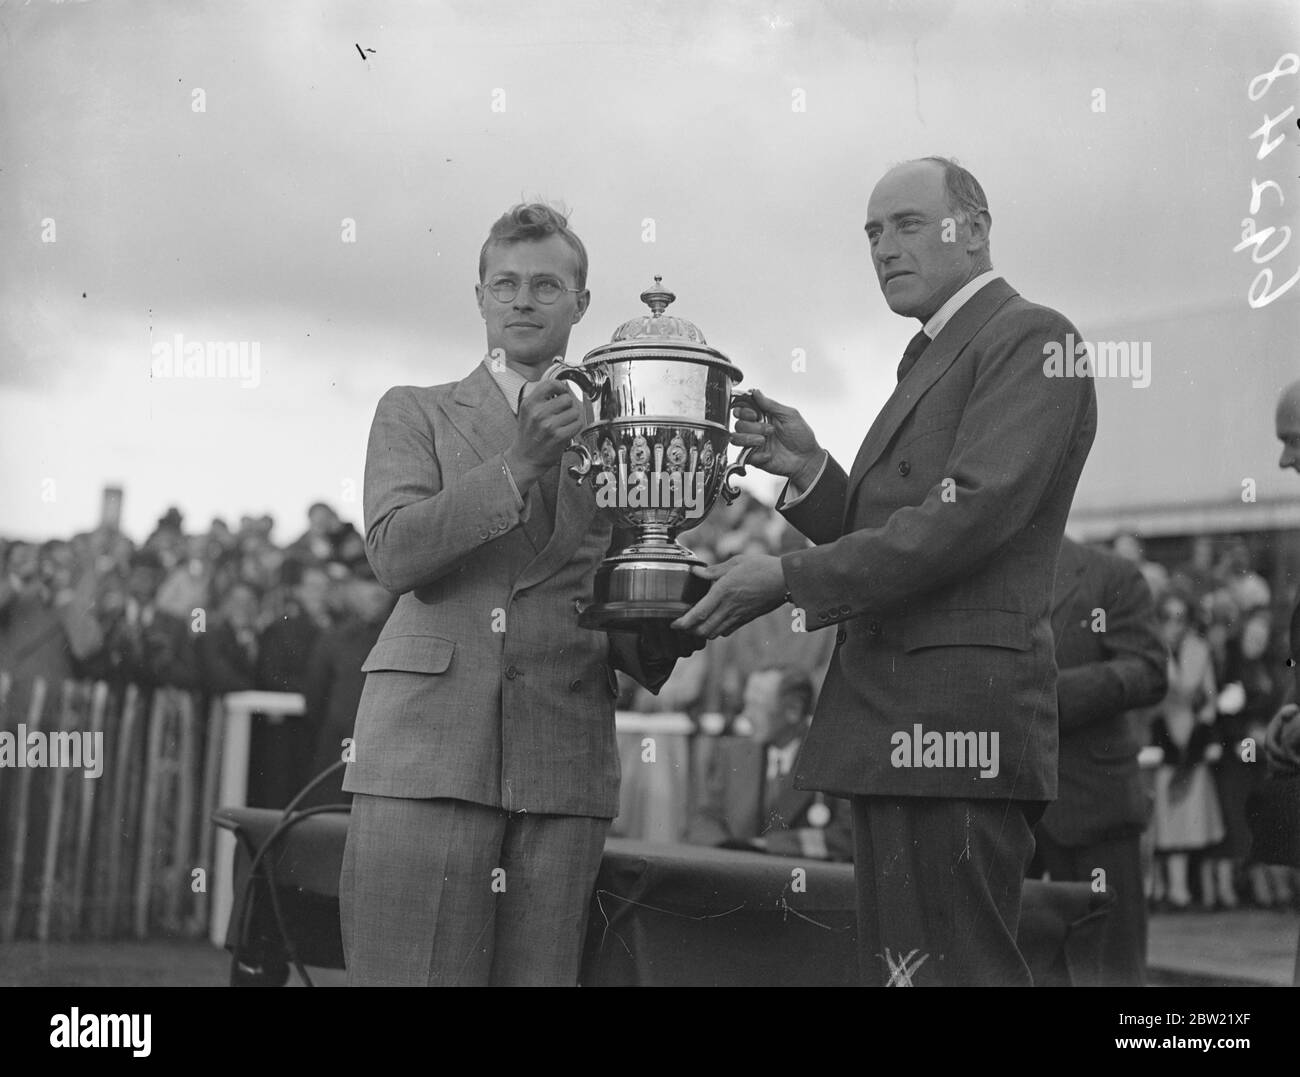 Lord Swinton, the air minister presenting C.E Gardener flying a percival Mew Gull, one the King cup air race for the second year in succession. Second with 63-year-old brigadier general A.C Lewin who bought his Milea whitney machine all the way from Kenya to compete. 11 September 1937. Stock Photo